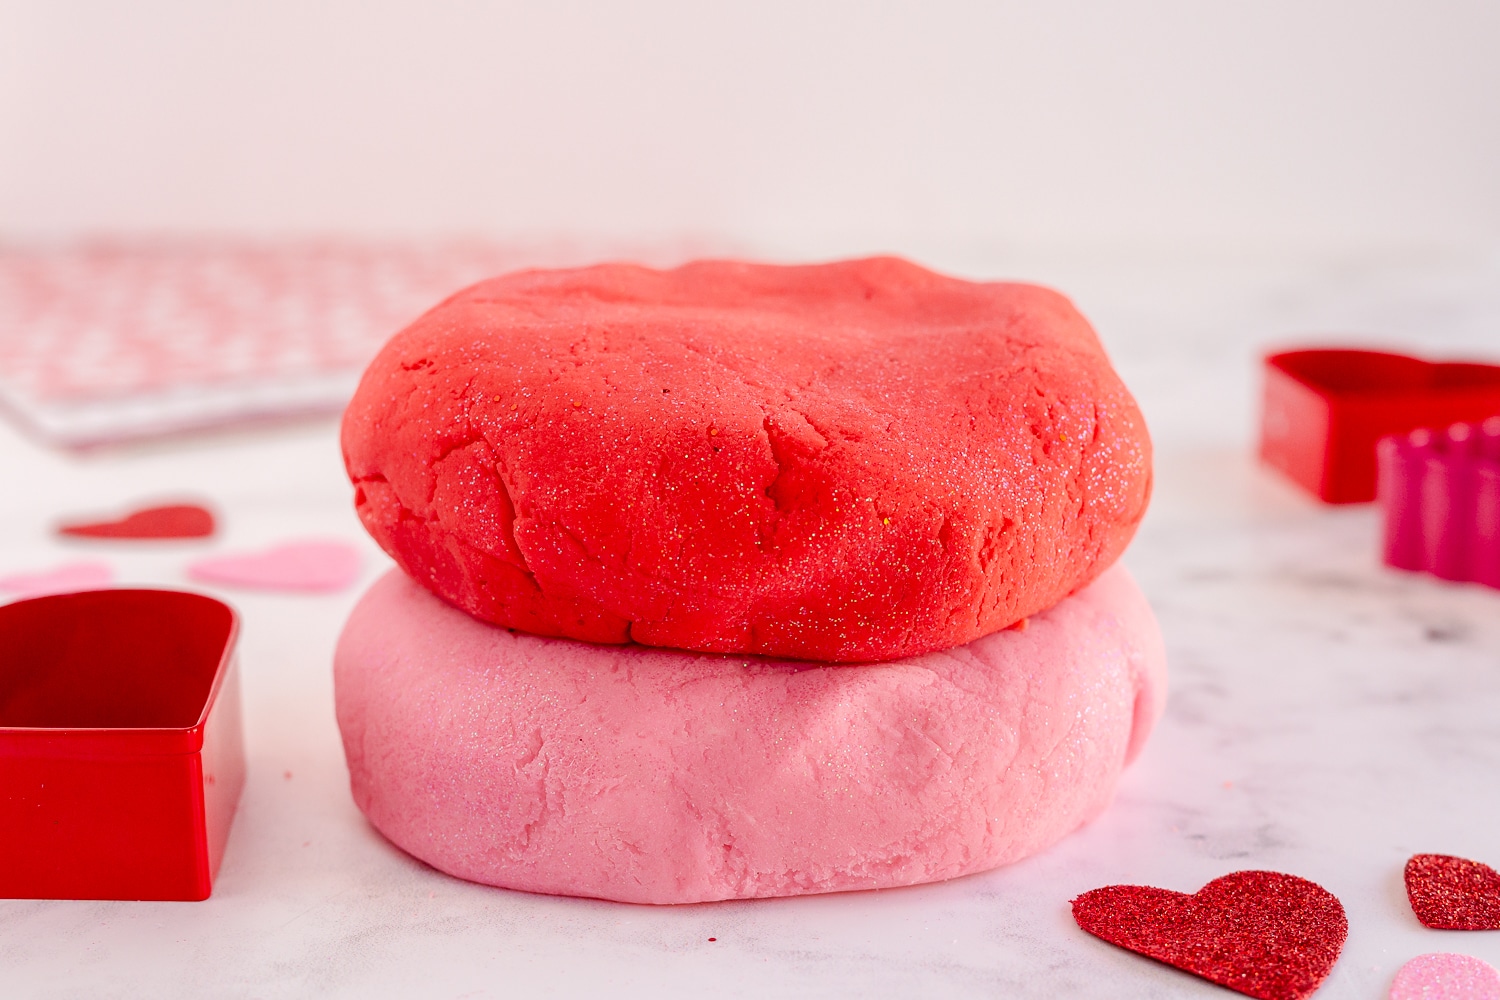 strawberry playdough - red and pink